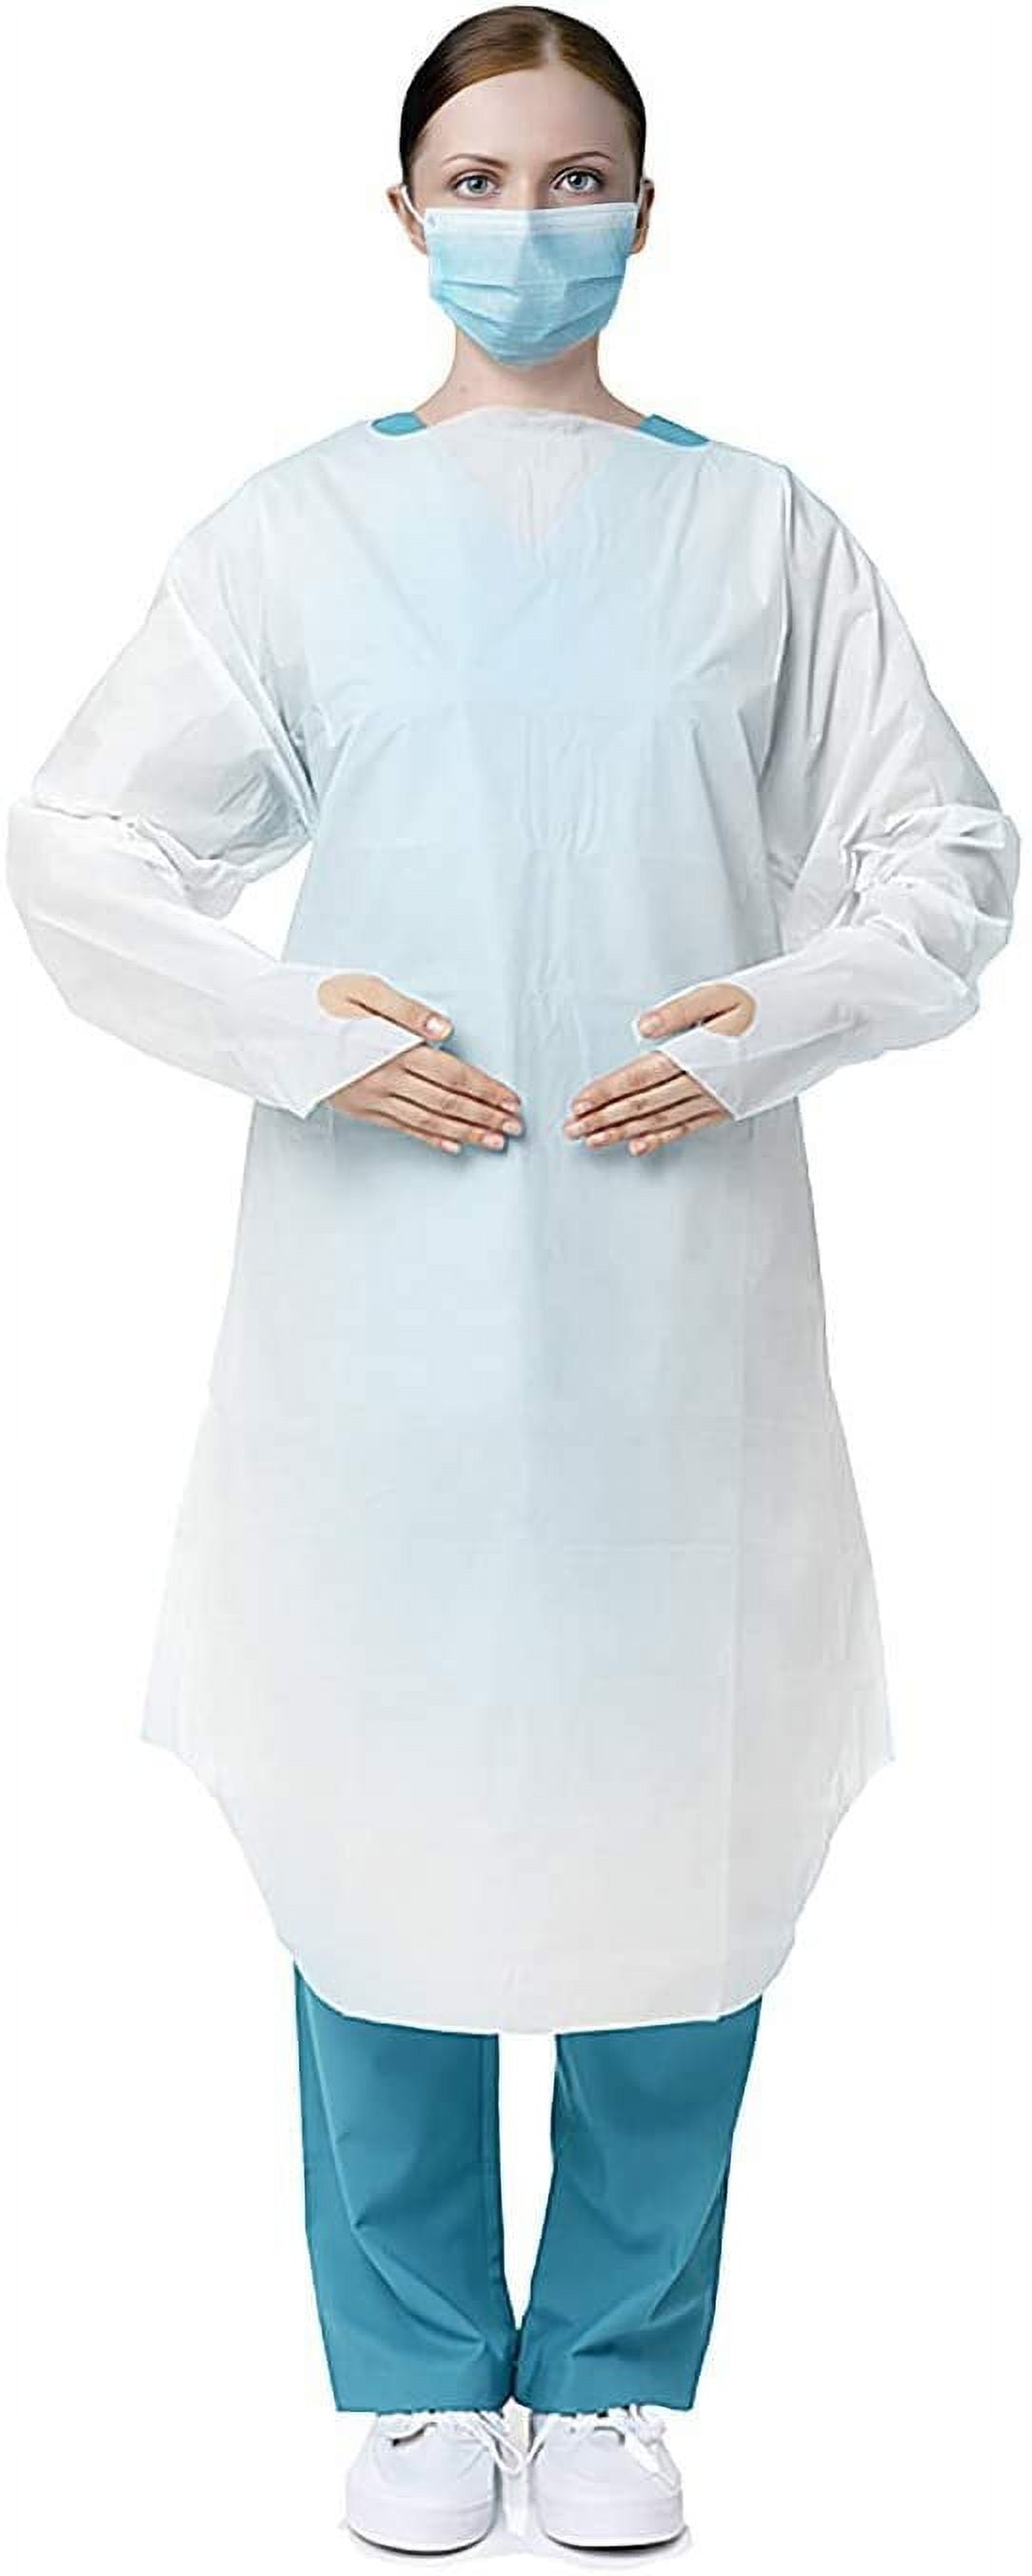 Hospital Gowns Market Size, Share | Industry Forecast by 2030